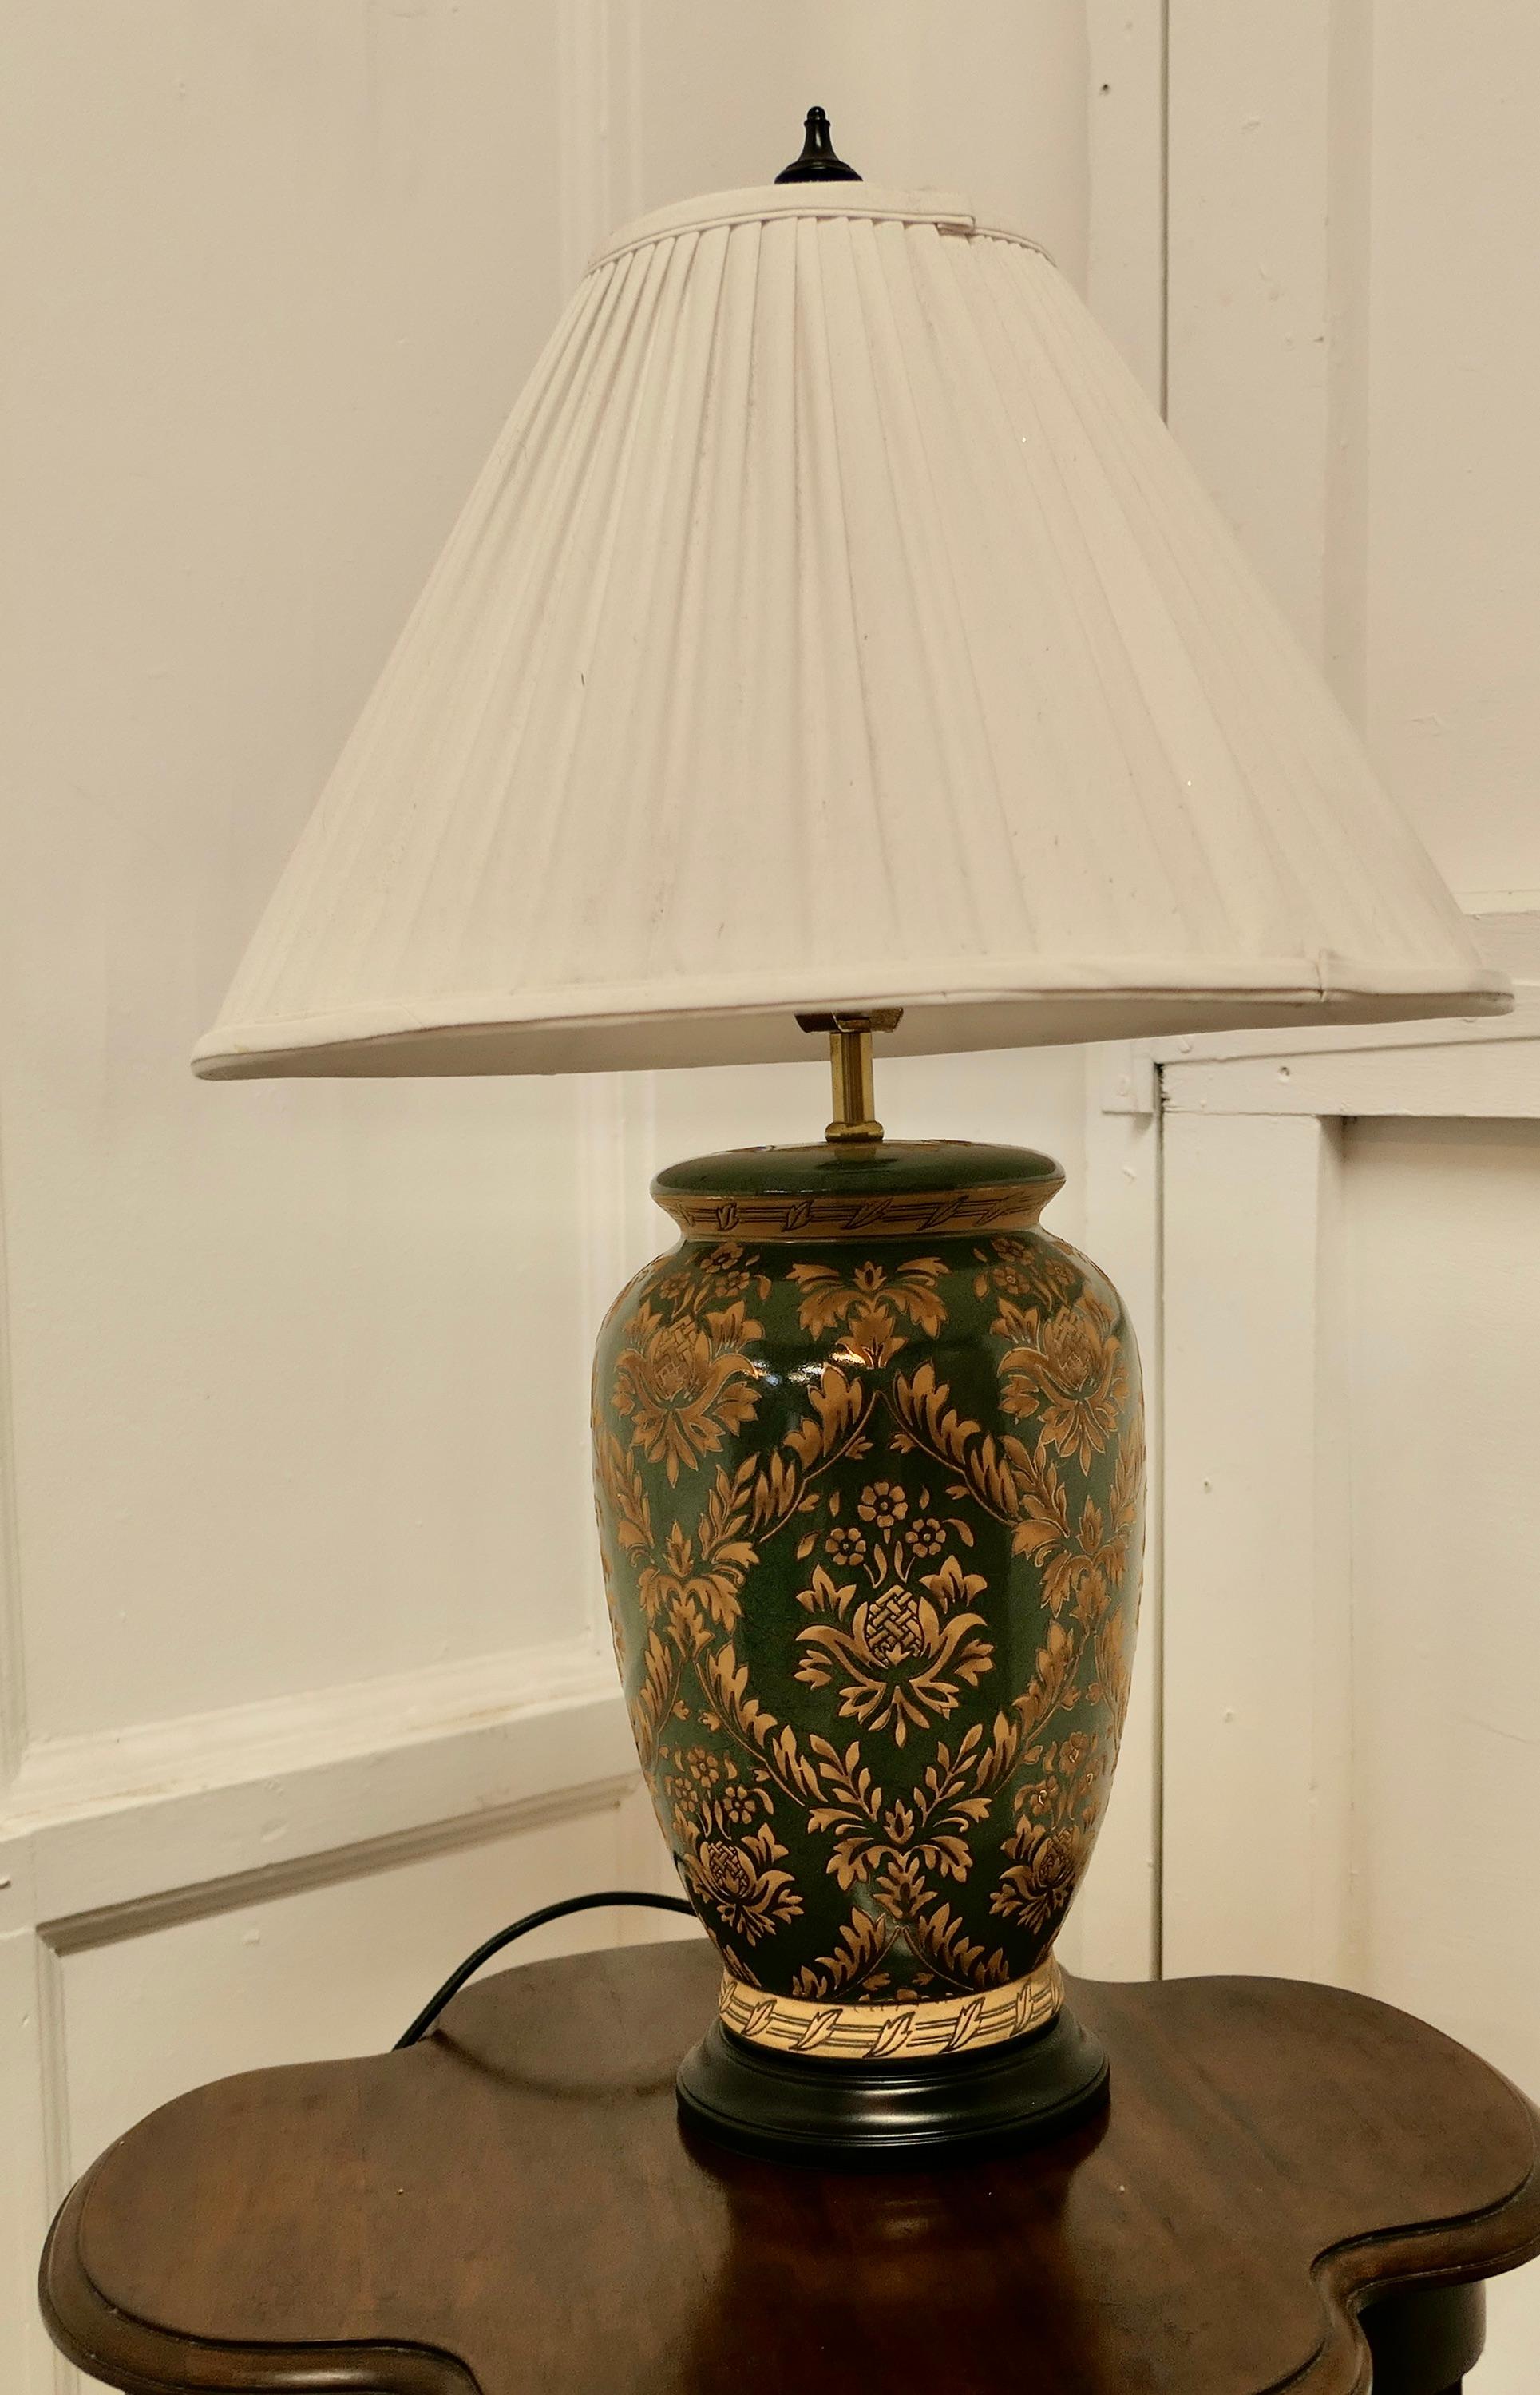 Large Vintage Porcelain vase lamp, Chintz Design.


A lovely vintage piece and it comes with a pleated linen shade.
Each side of the vase has a cartouche with flowers.
The lamp is decorated with a chintz brocade design. 
The lamp is in good